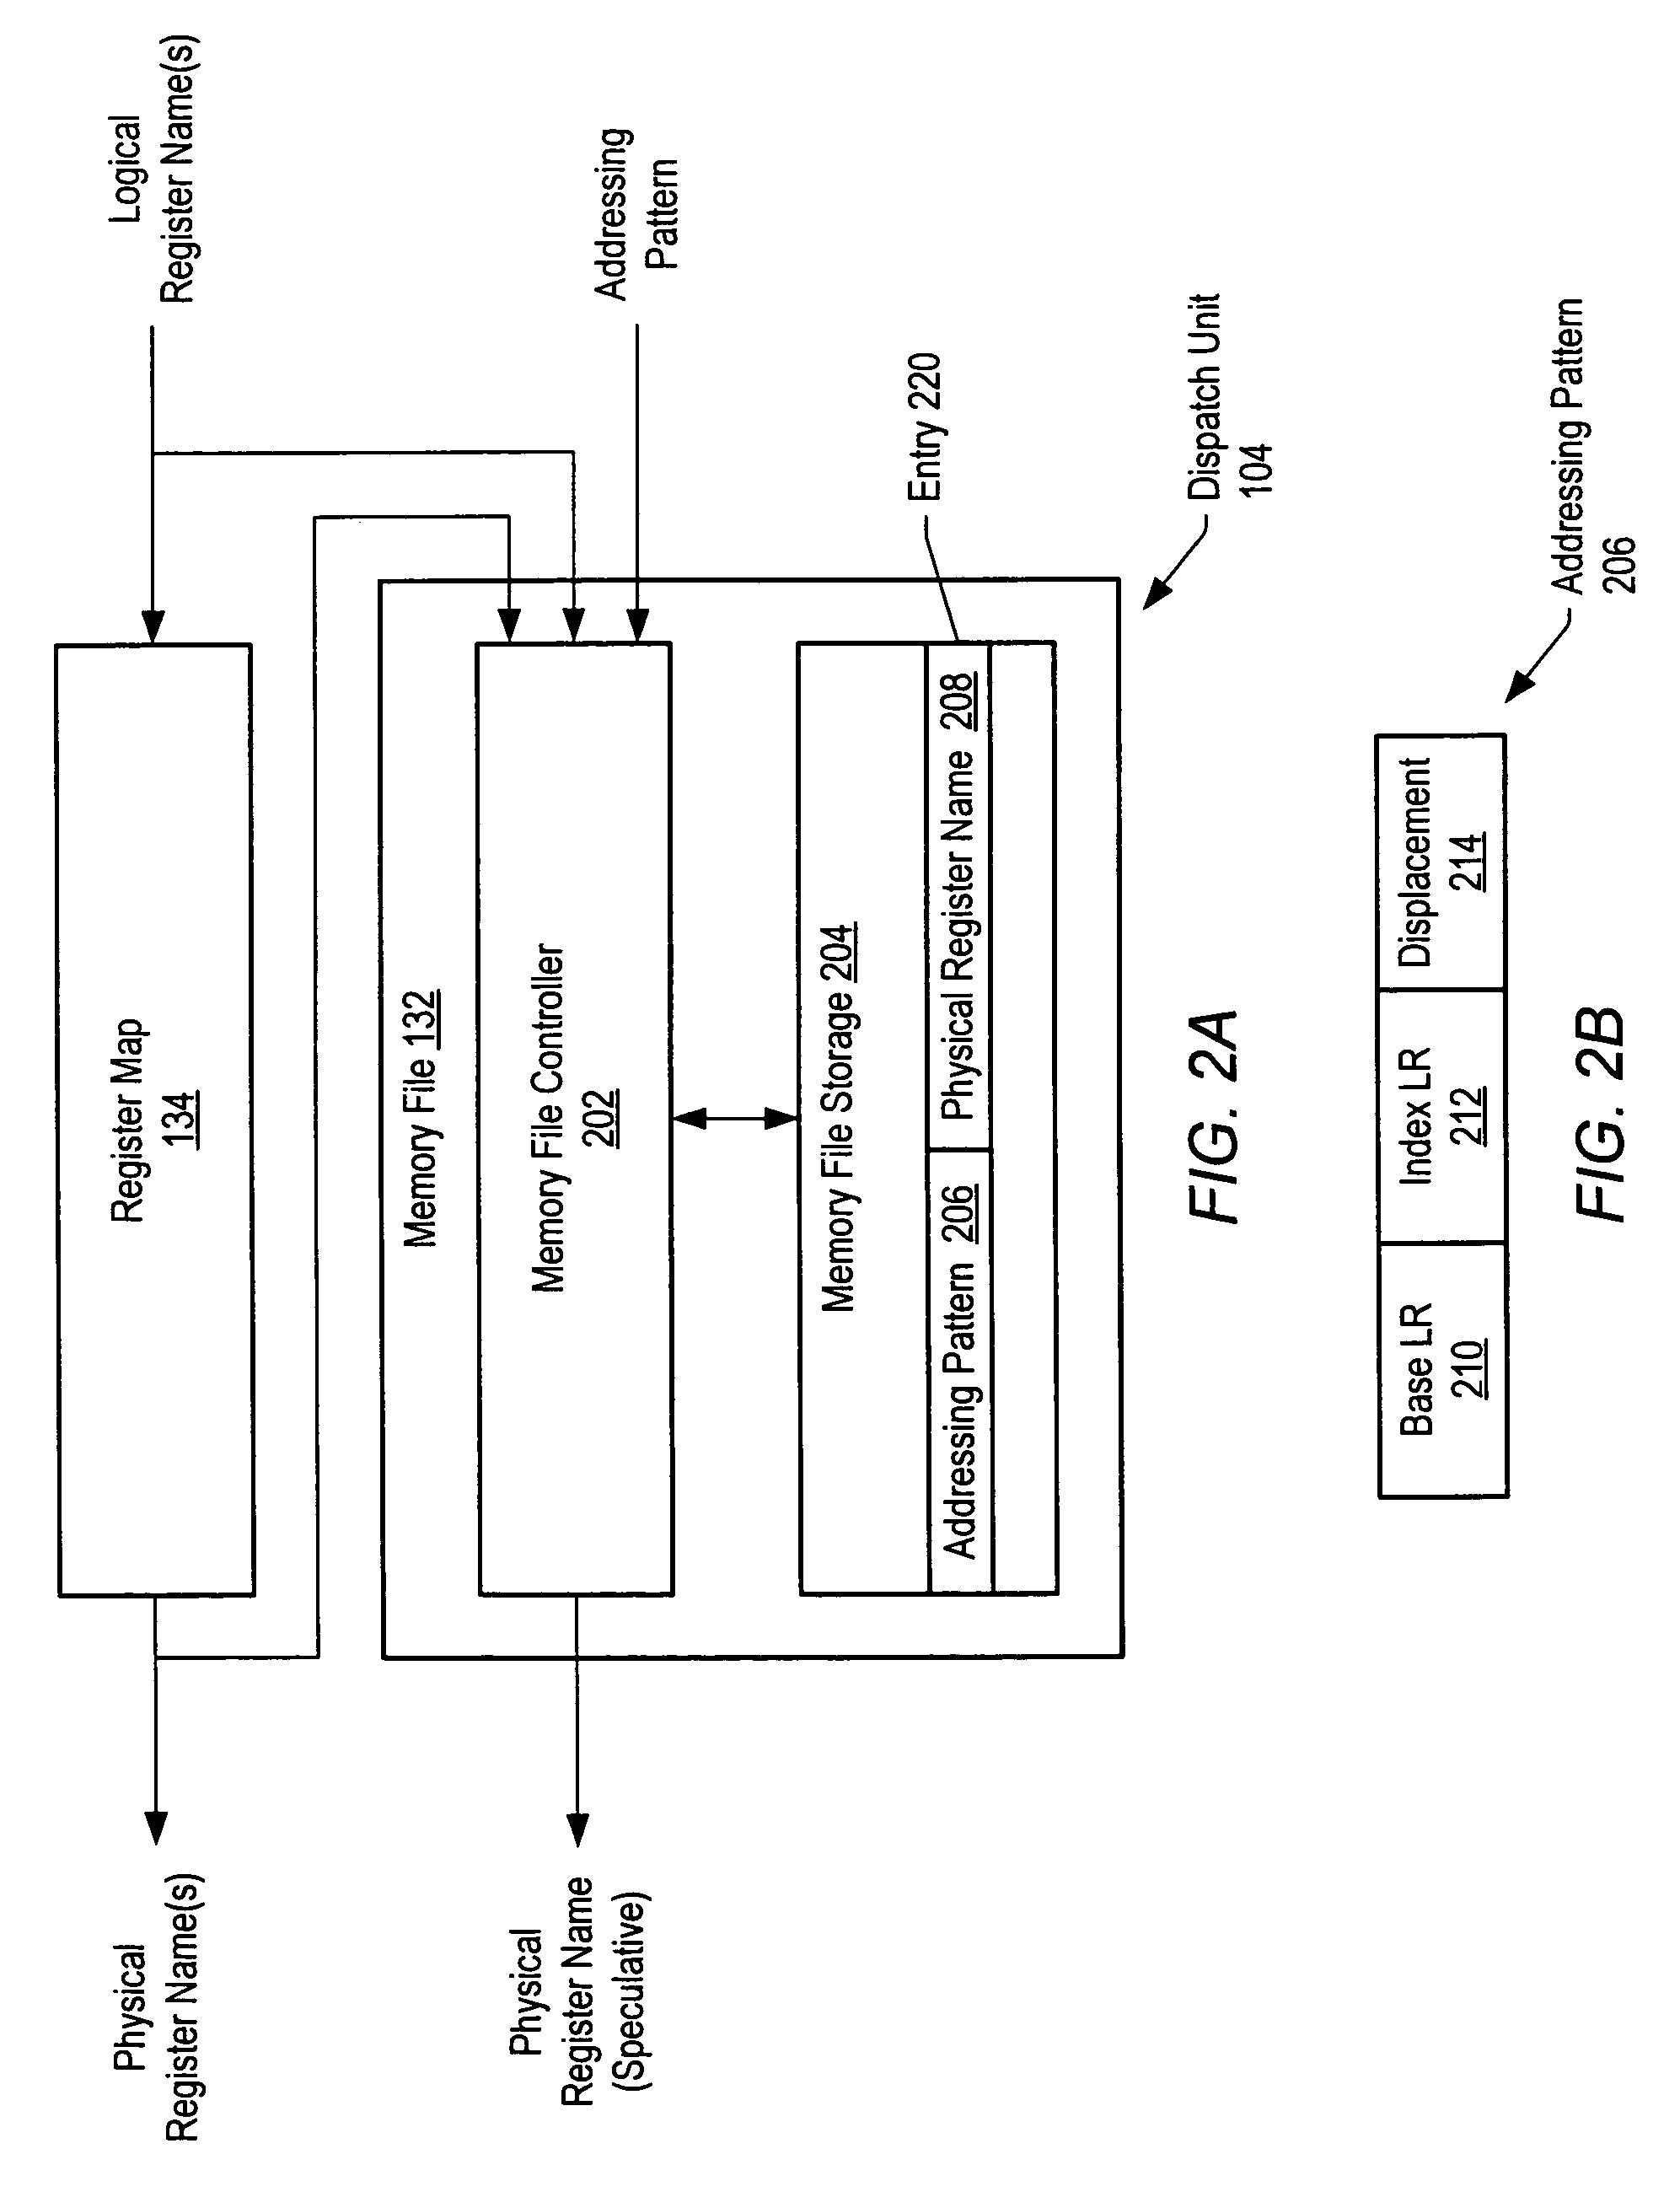 System and method for validating a memory file that links speculative results of load operations to register values